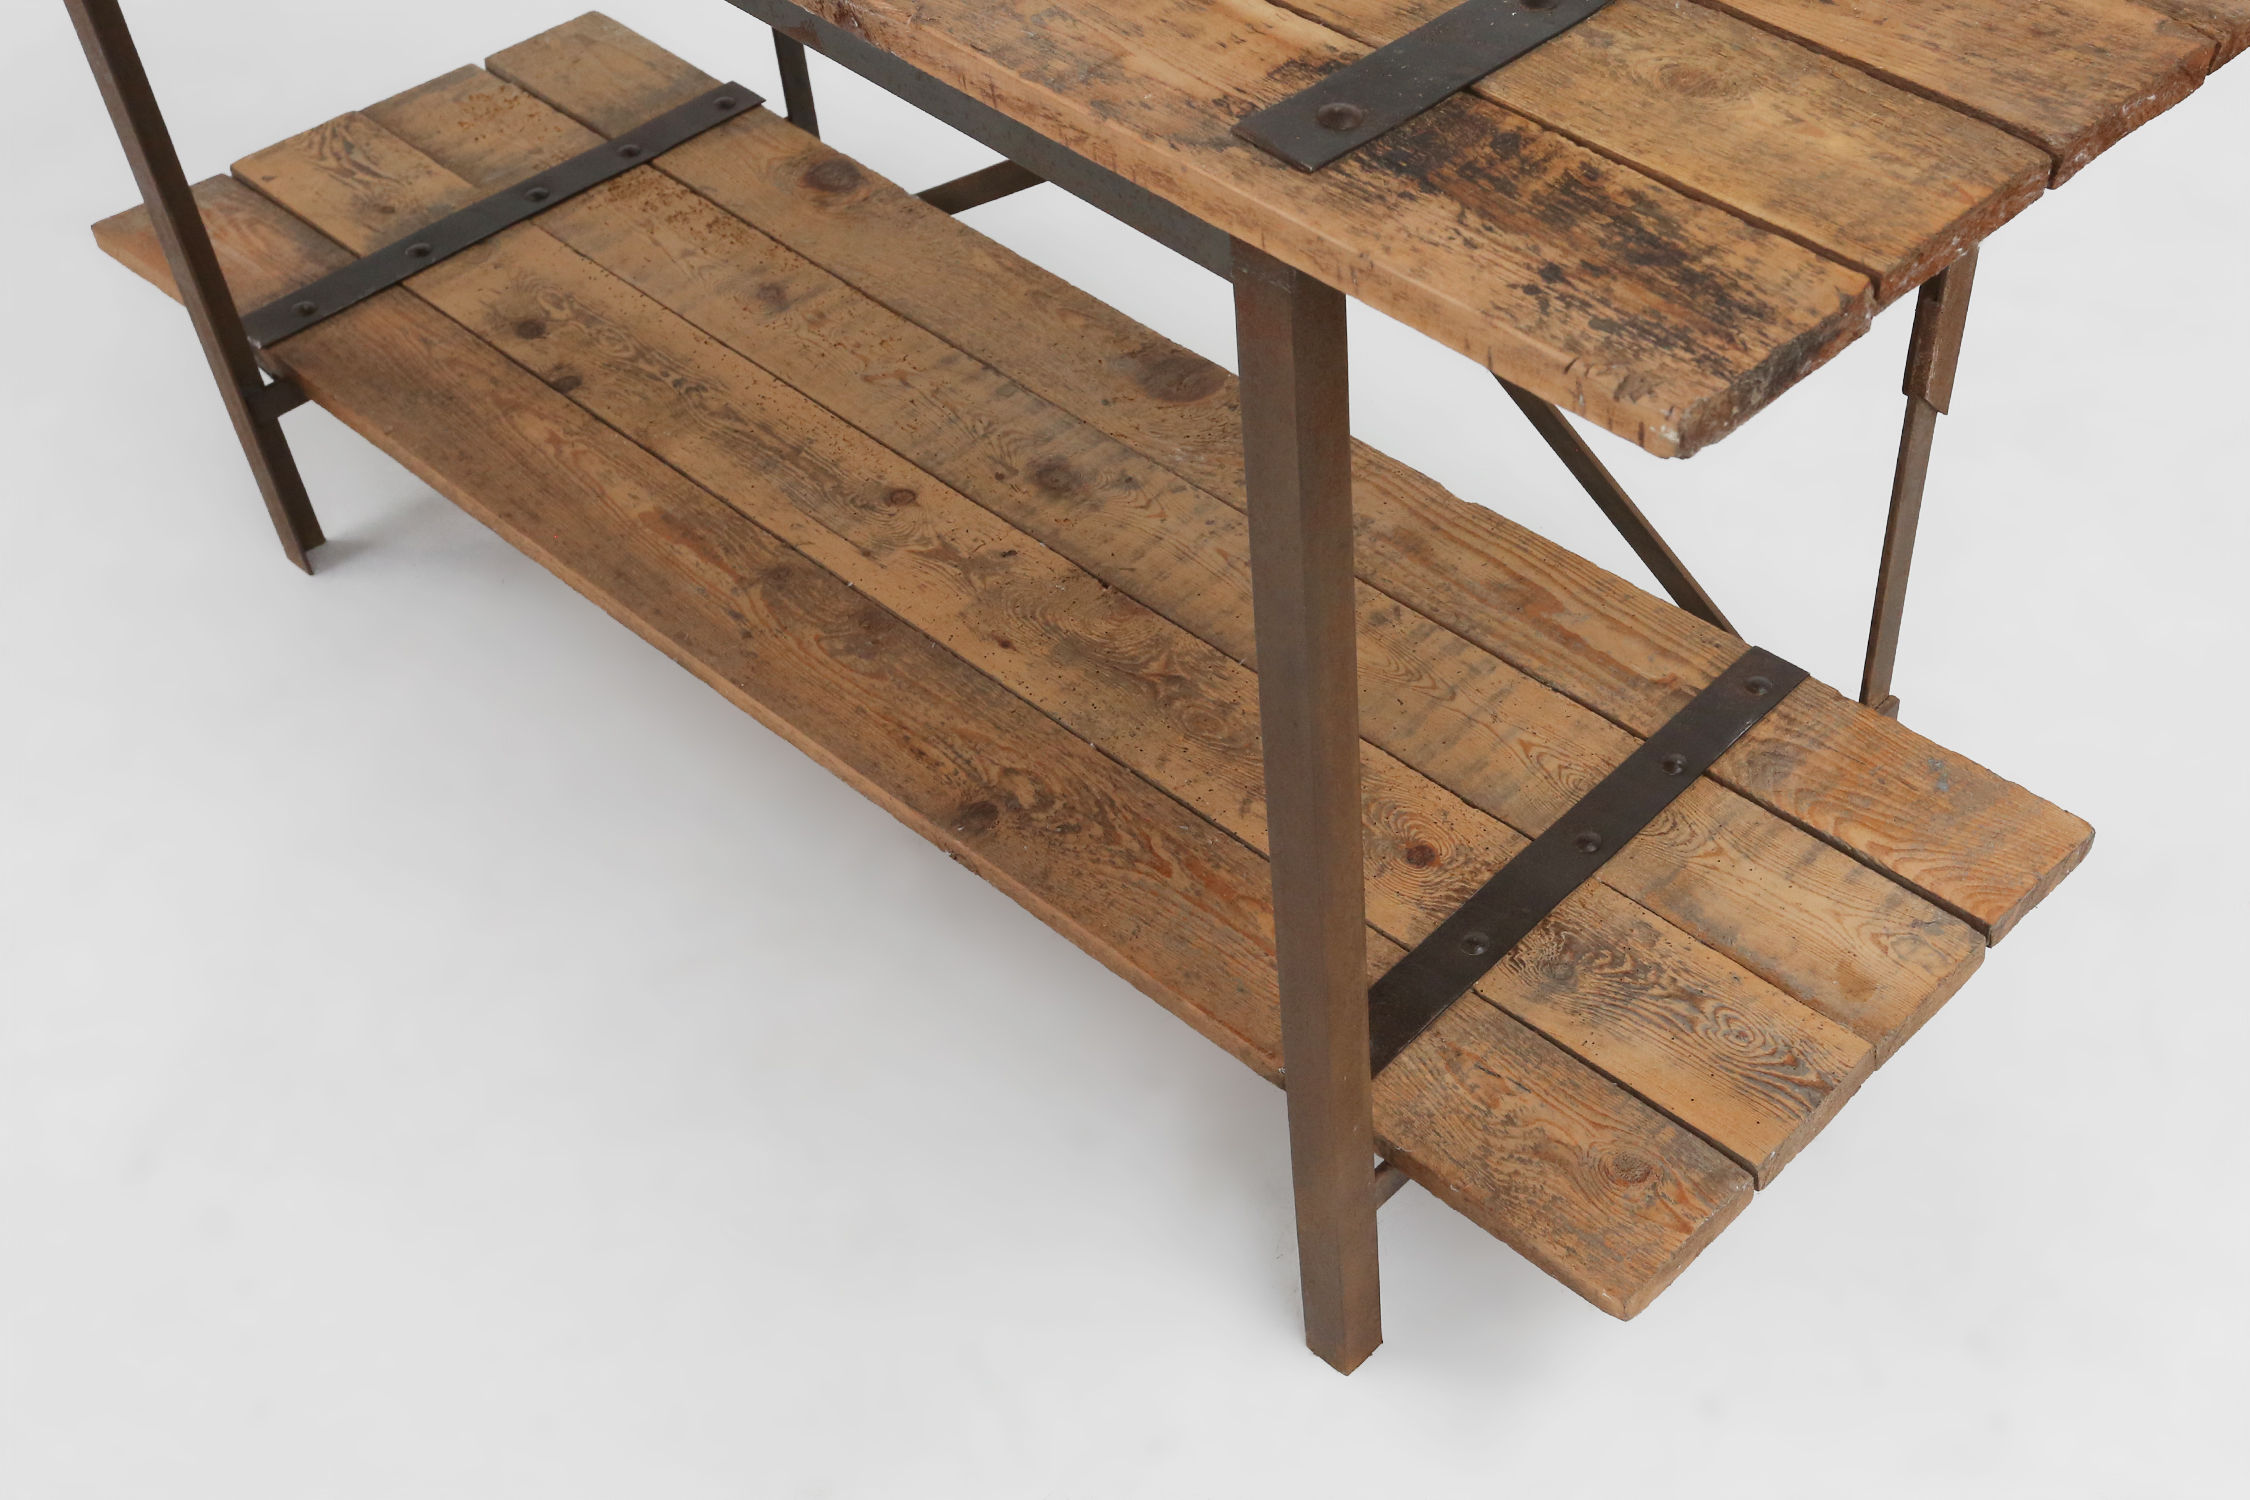  Industrial side tables with metal frame and wooden top and removable platform, Belgium, 1920thumbnail